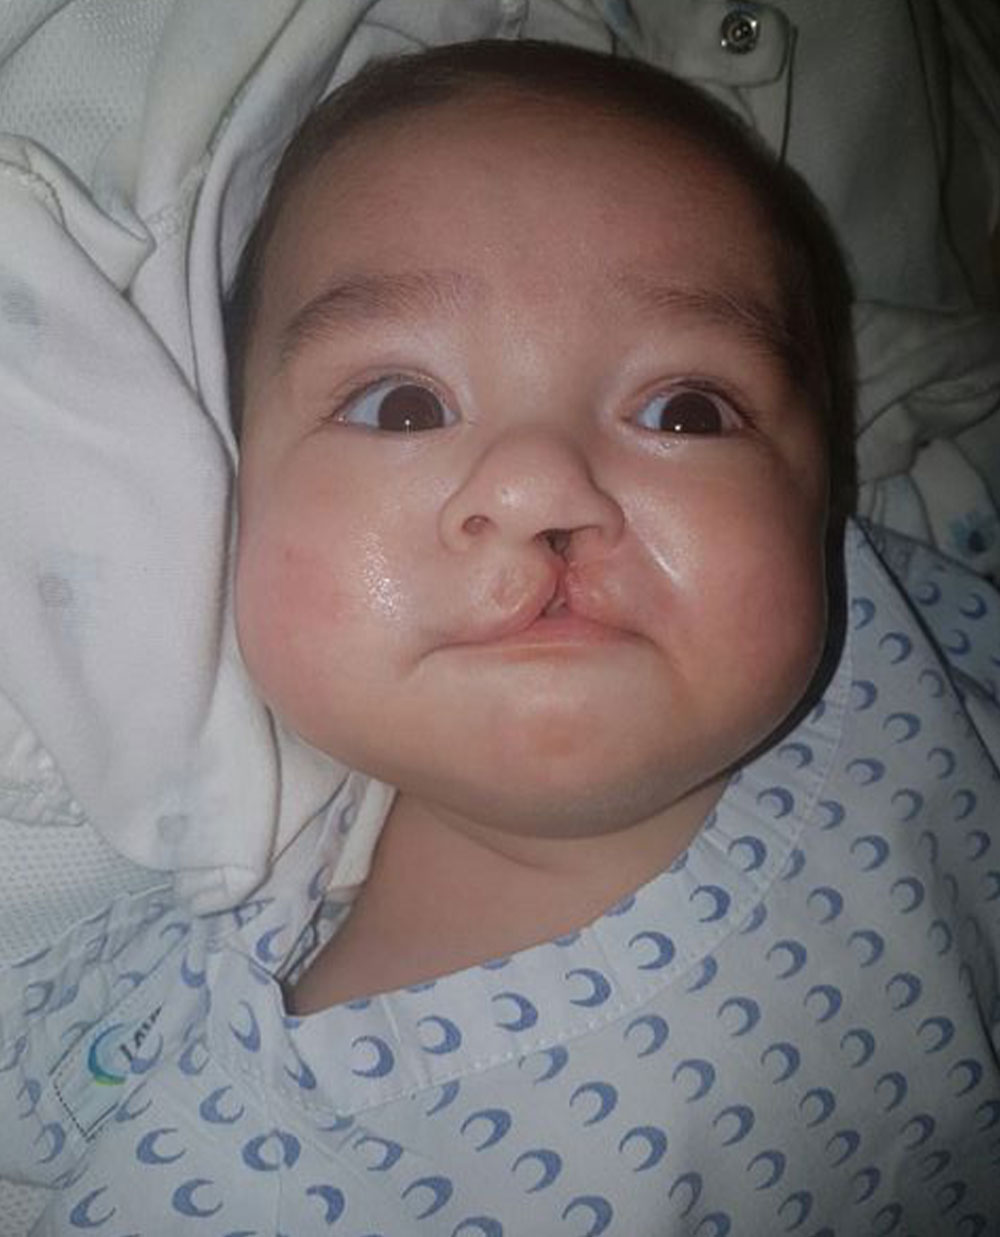 Damian as a baby, before cleft surgery